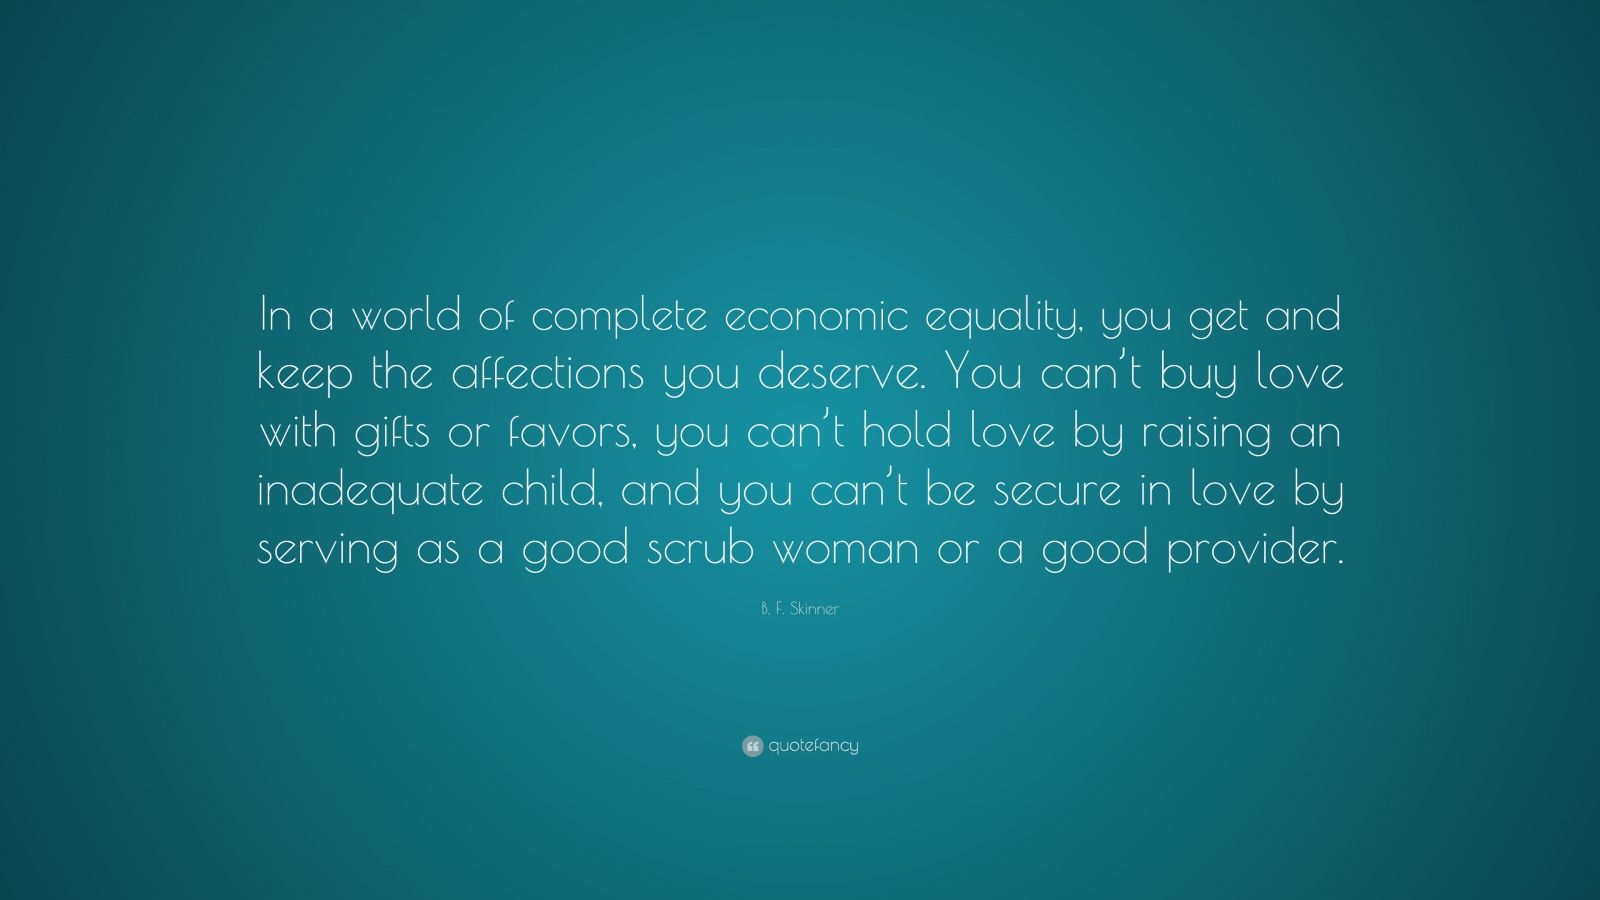 B F Skinner Quote “In a world of plete economic equality you and